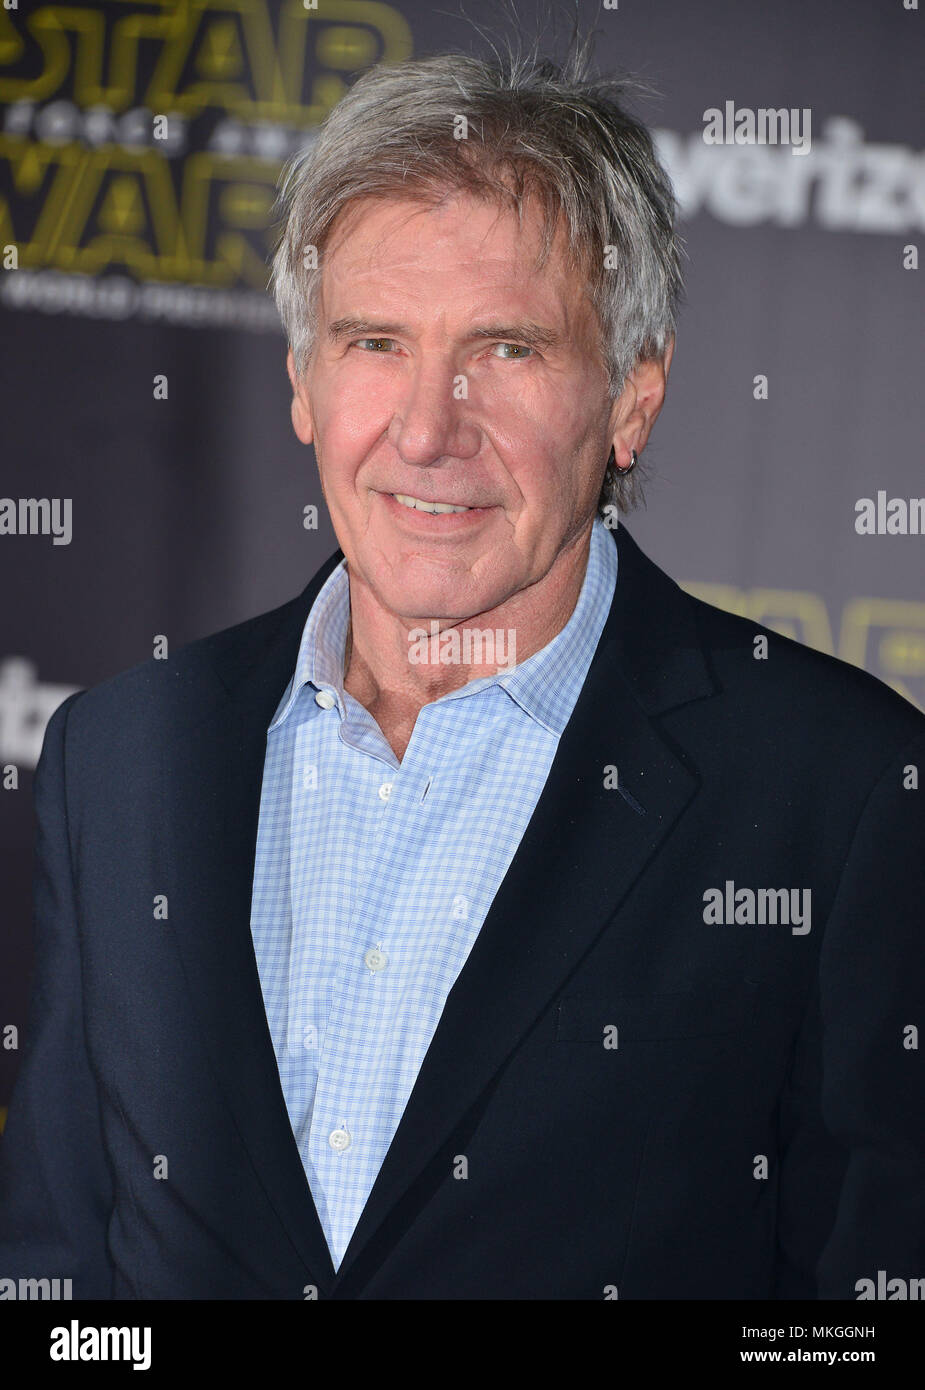 Harrison Ford  at the Star Wars The Force Awakens Premiere at the Dolby Theatre, TCL Chinese Theatre and El Capitan Theatre on December 14, 2015 in Hollywood, Harrison Ford   Event in Hollywood Life - California,  Red Carpet Event, Vertical, USA, Film Industry, Celebrities,  Photography, Bestof, Arts Culture and Entertainment, Topix Celebrities fashion / one person, Vertical, Best of, Hollywood Life, Event in Hollywood Life - California,  Red Carpet and backstage, USA, Film Industry, Celebrities,  movie celebrities, TV celebrities, Music celebrities, Photography, Bestof, Arts Culture and Enter Stock Photo